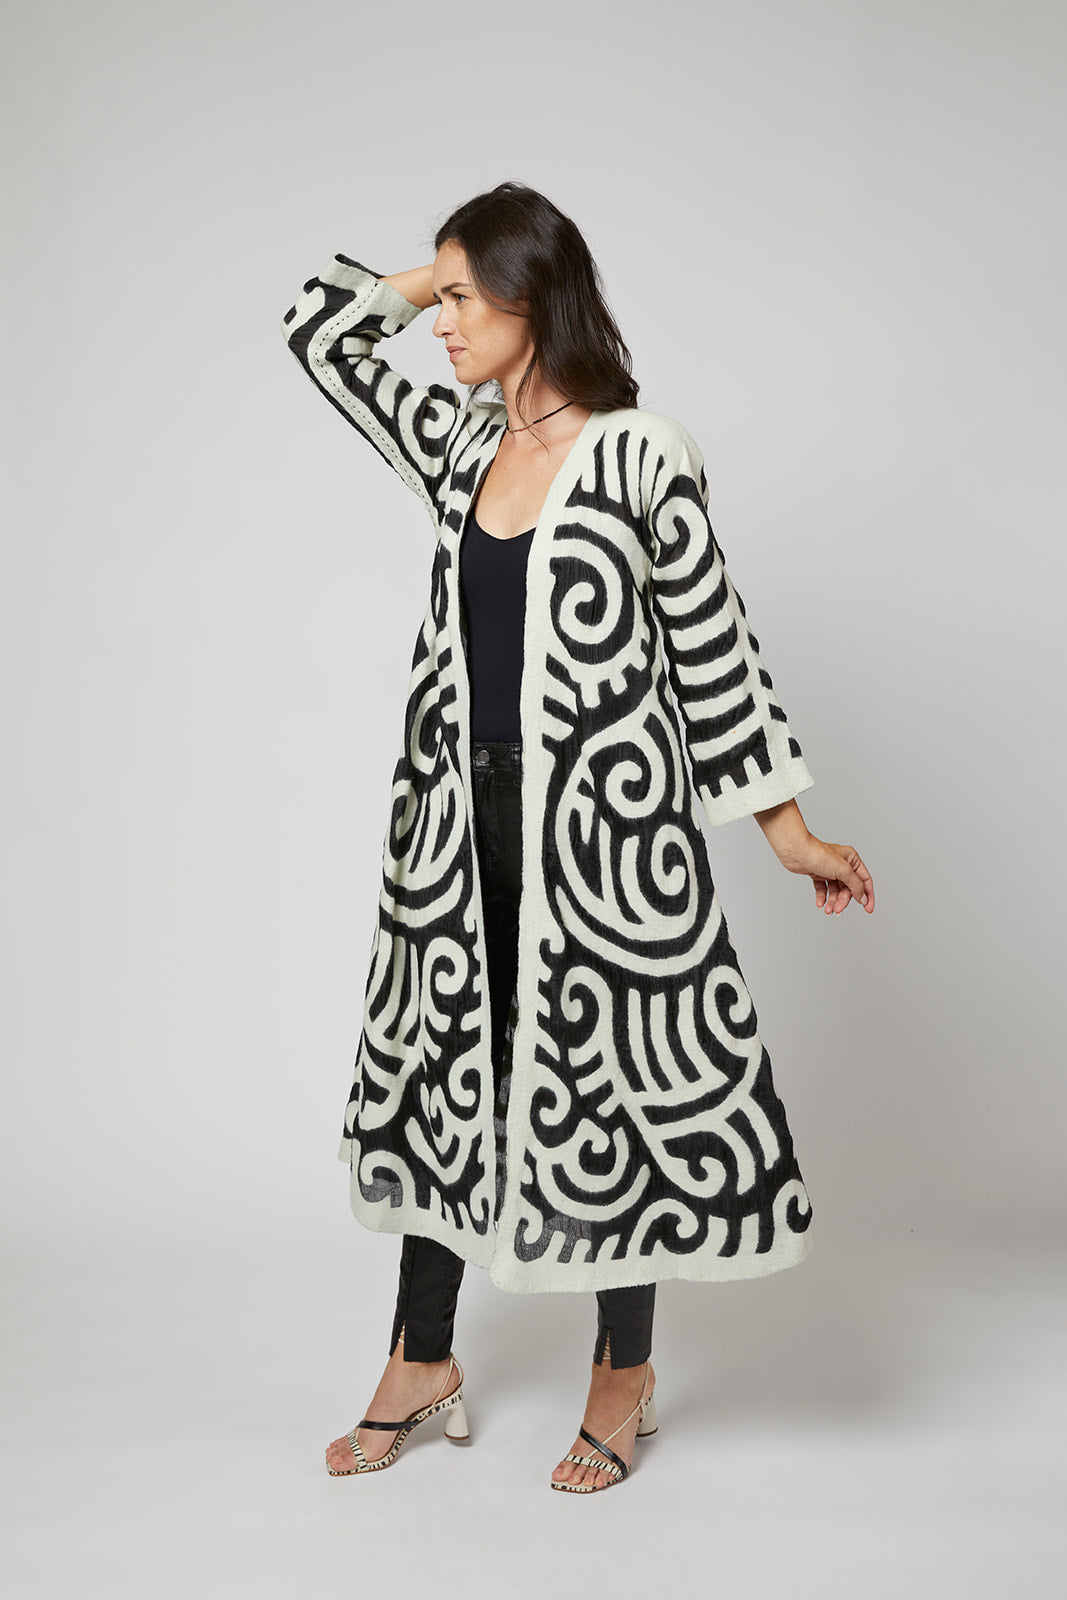 Felted Wool Coat from Kyrgyzstan - Long - Ivory and Black by Larkin Lane